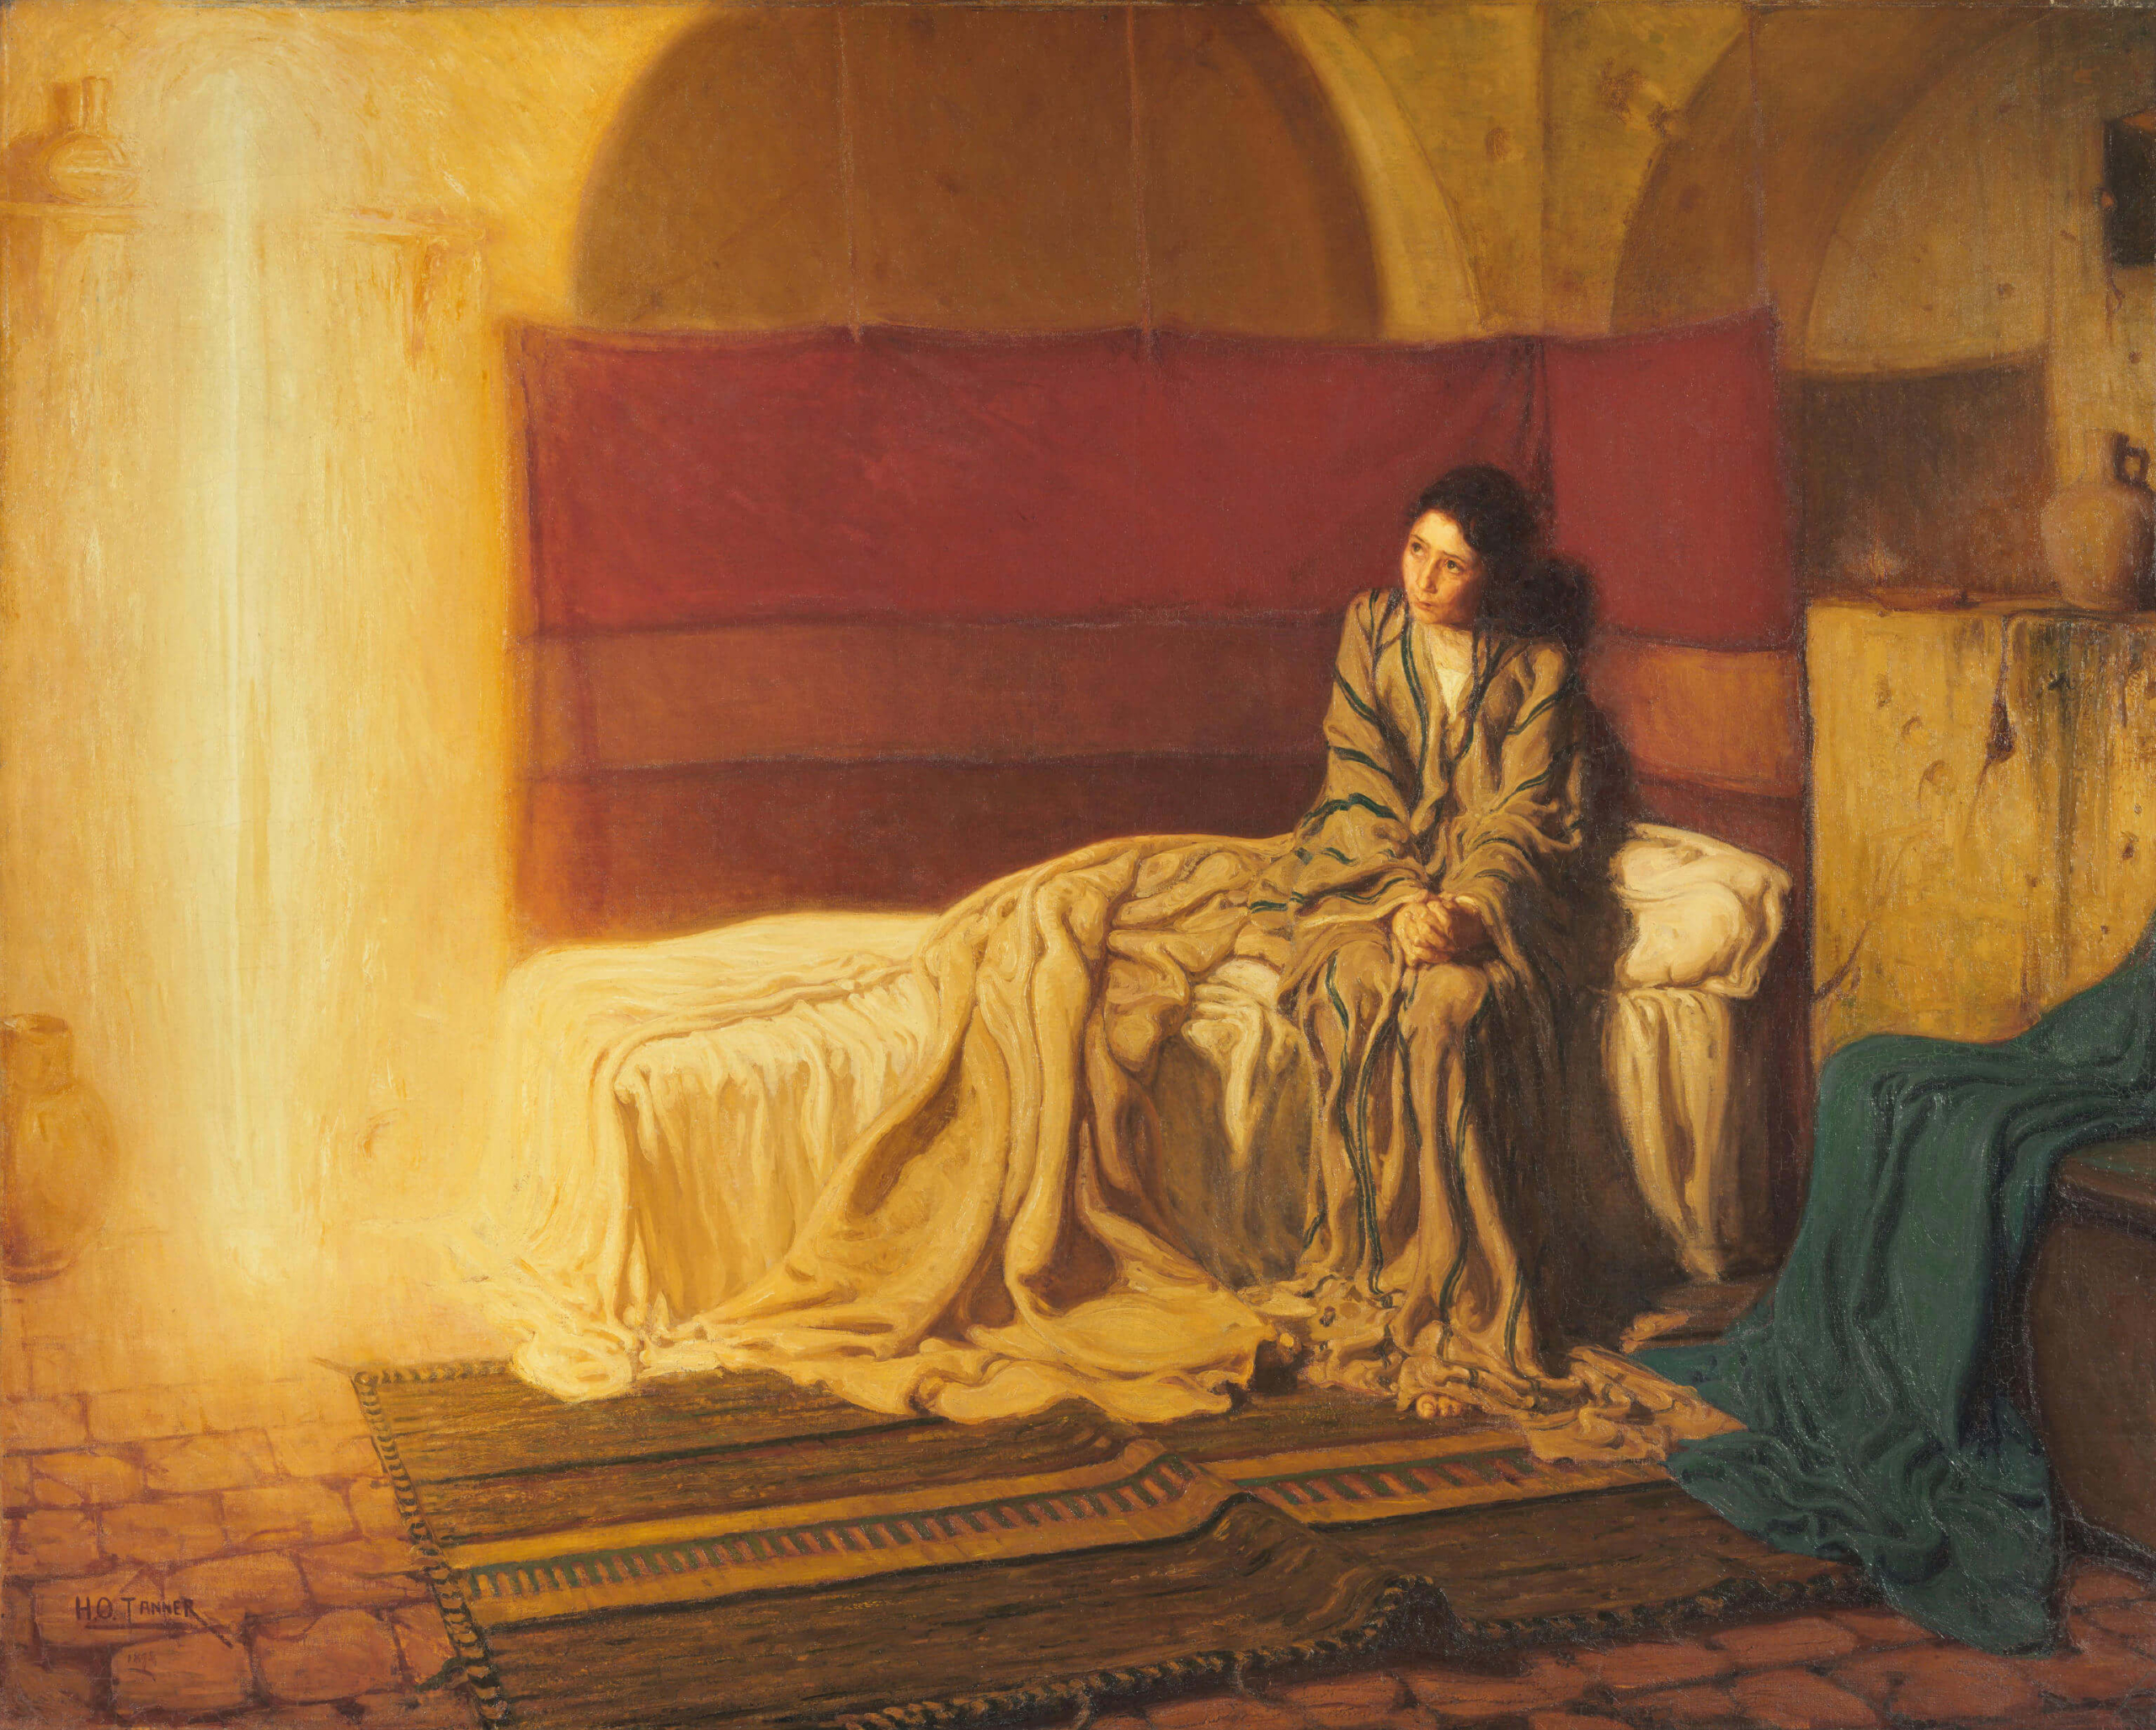 Visio Divina: The Annunciation by Henry Ossawa Tanner